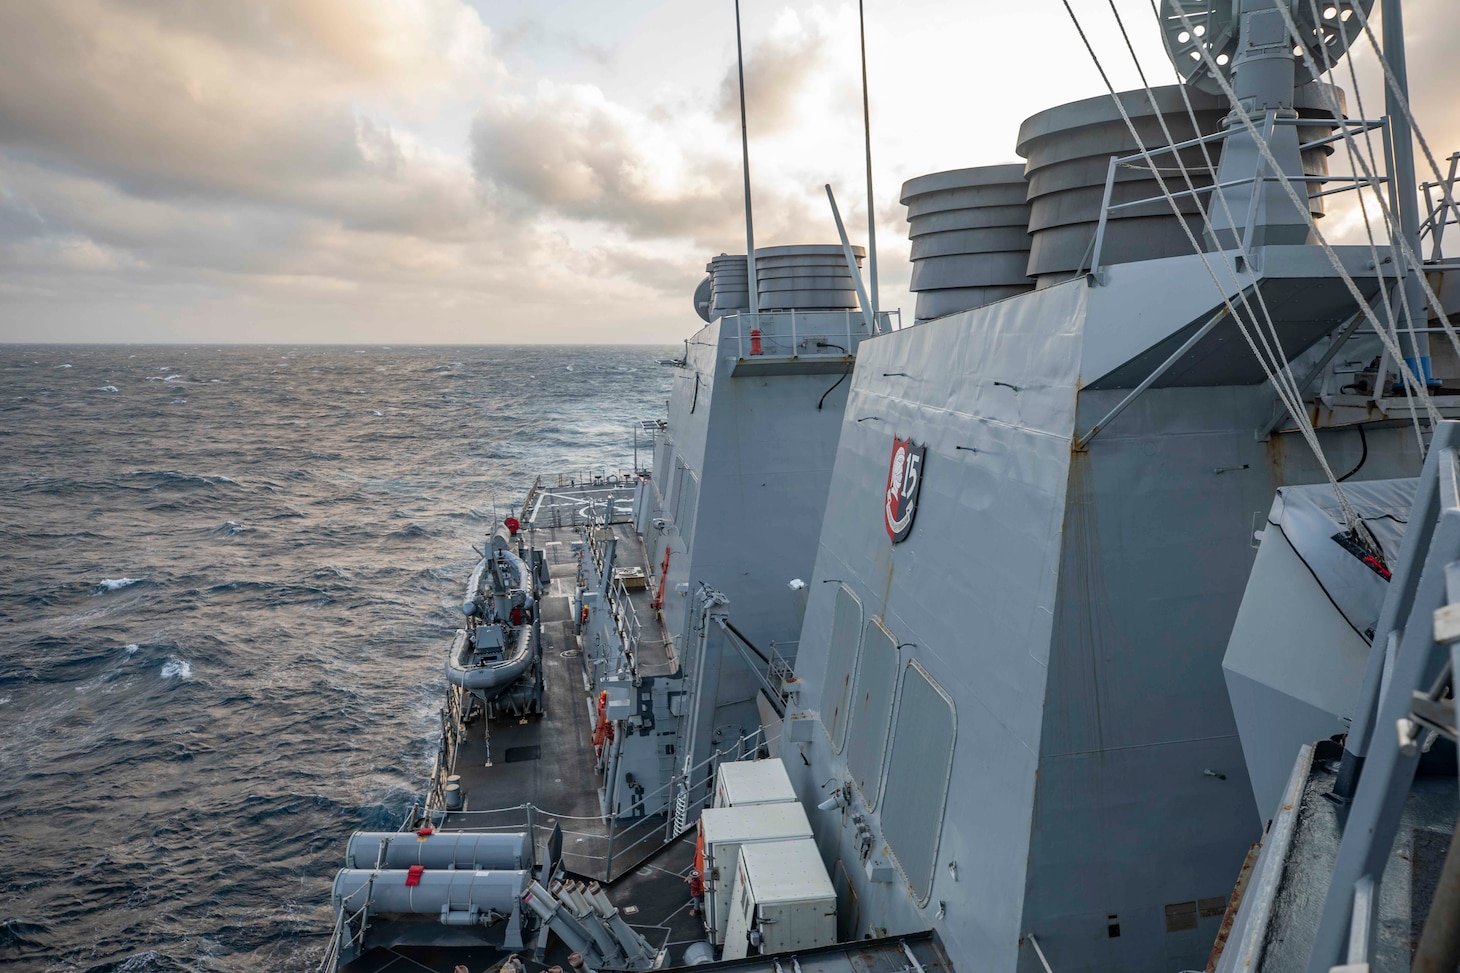 211122-N-QF023-1002 TAIWAN STRAIT - Arleigh Burke-class guided-missile destroyer USS Milius (DDG 69) conducts a routine transit through the Taiwan Strait Nov. 22, 2021. Milius, assigned to Commander, Task Force (CTF) 71/Destroyer Squadron (DESRON) 15, is forward-deployed to the U.S. 7th Fleet area of operations in support of a free and open Indo-Pacific.  (U.S. Navy photo by Mass Communication Specialist Seaman Apprentice RuKiyah Mack).